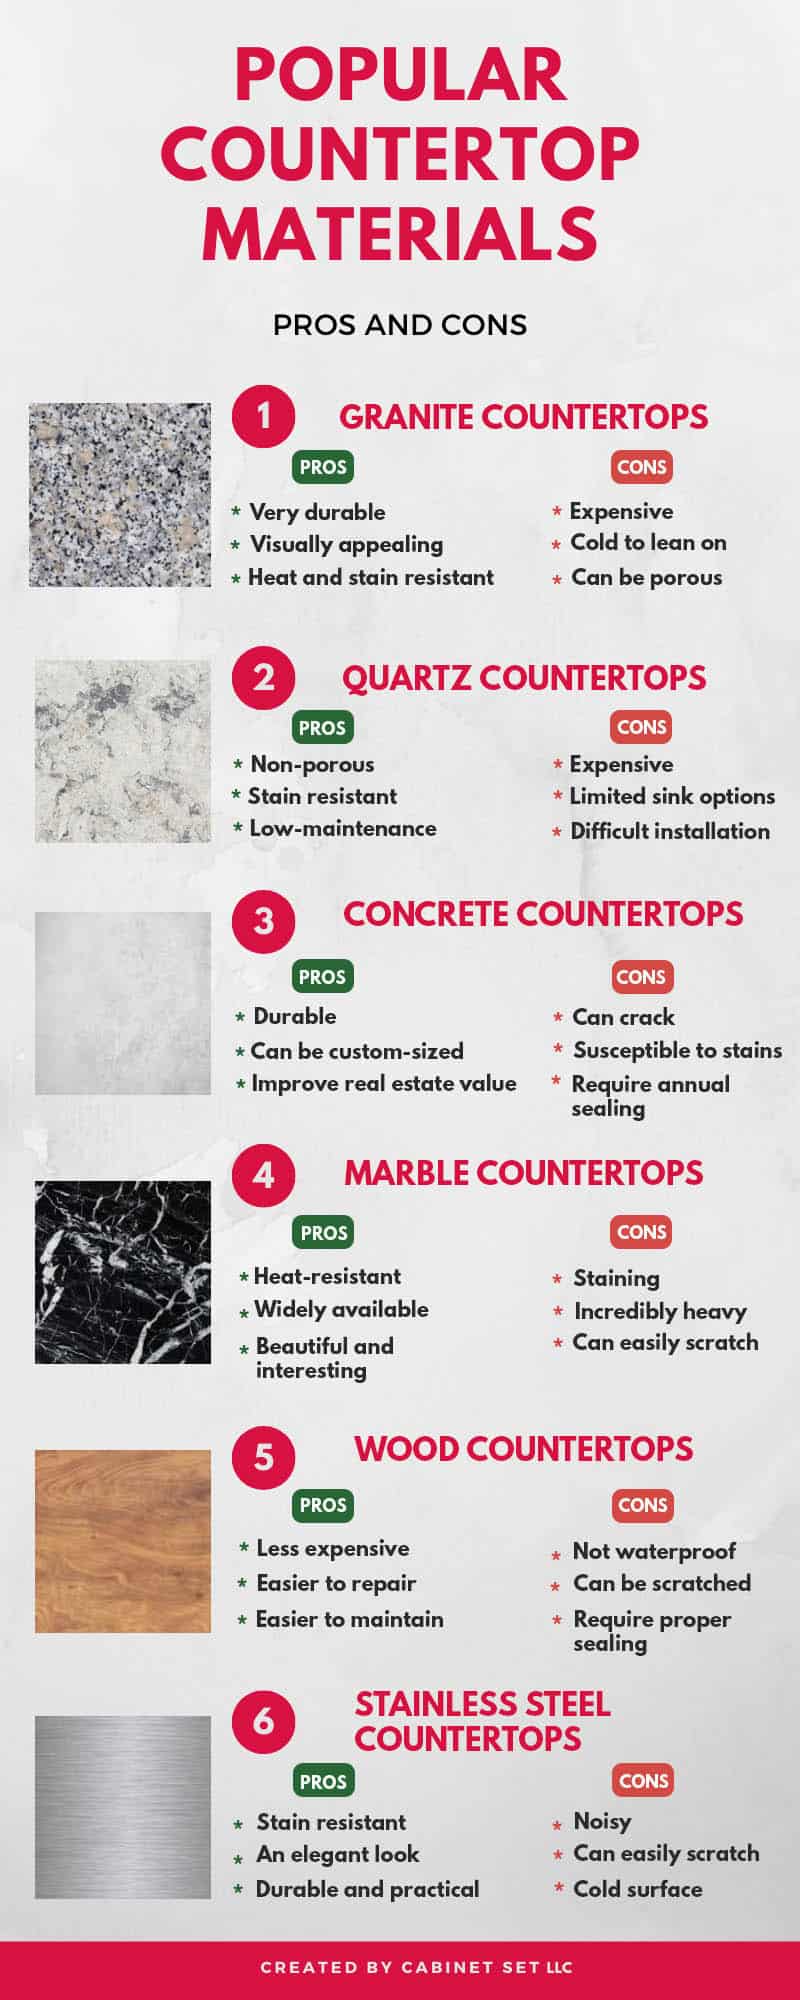 Pros and Cons of Popular Countertop Materials